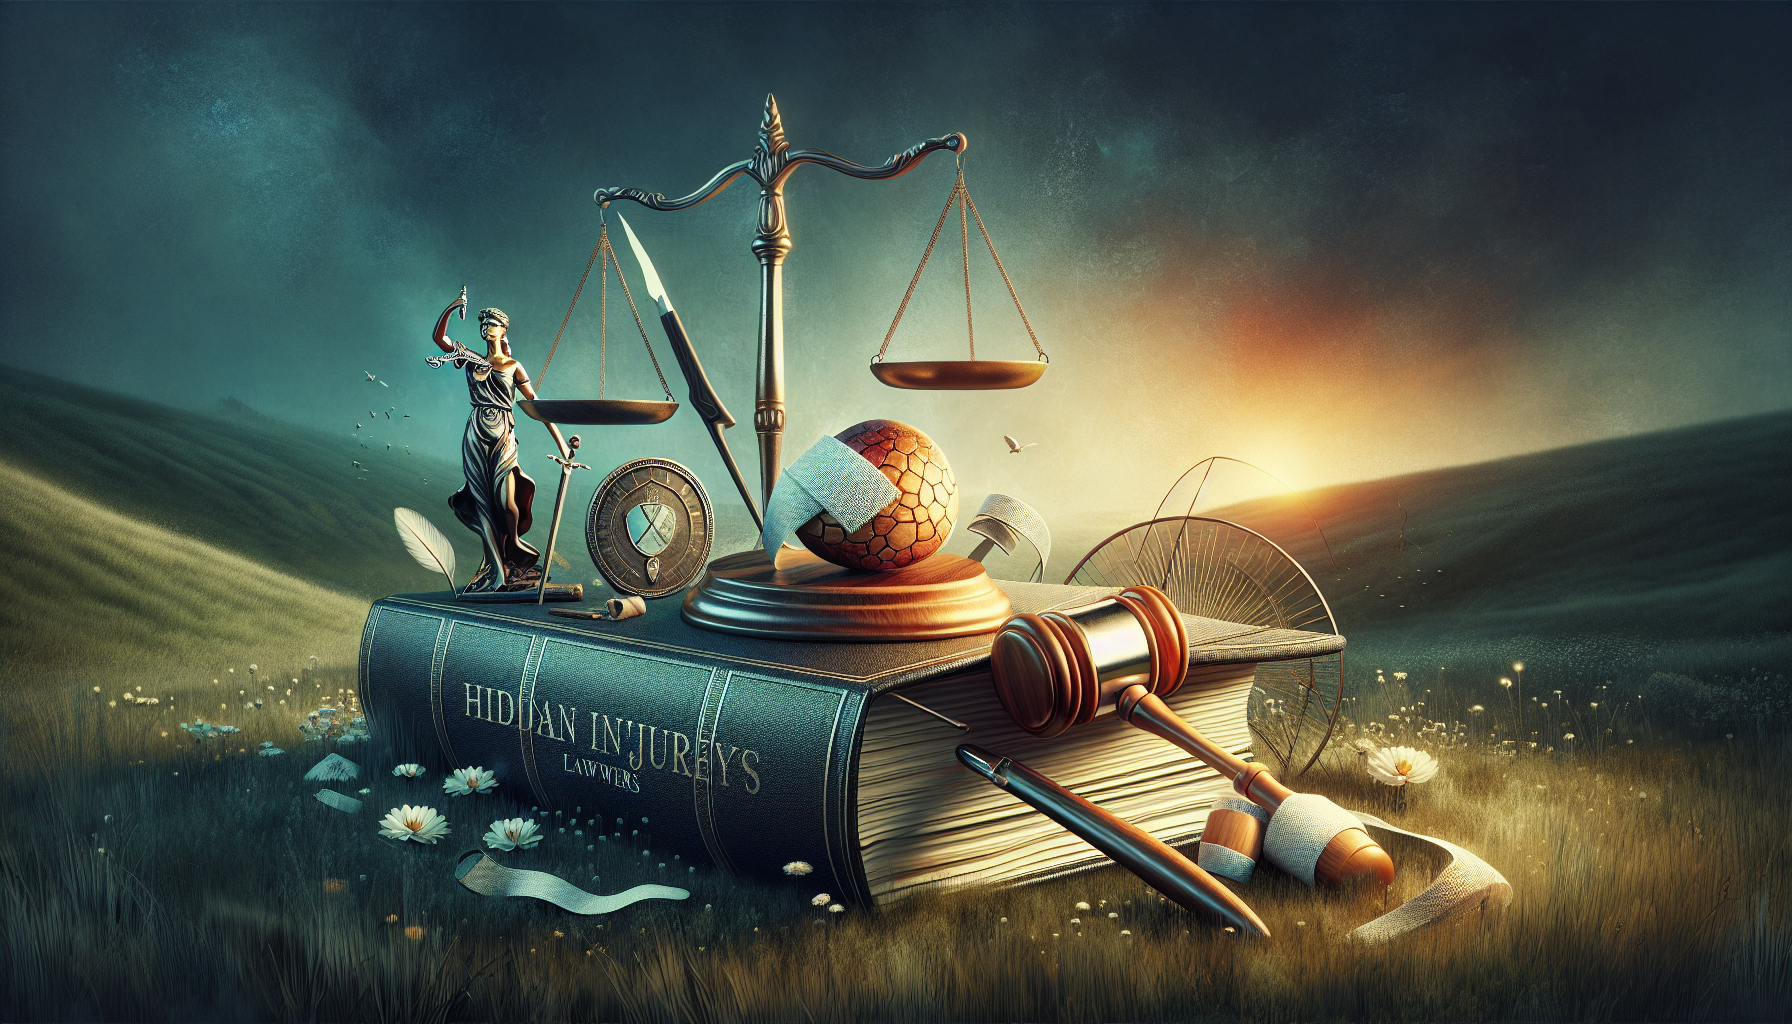 Artistic representation of comprehensive legal services offered by Hidden Meadows personal injury lawyers